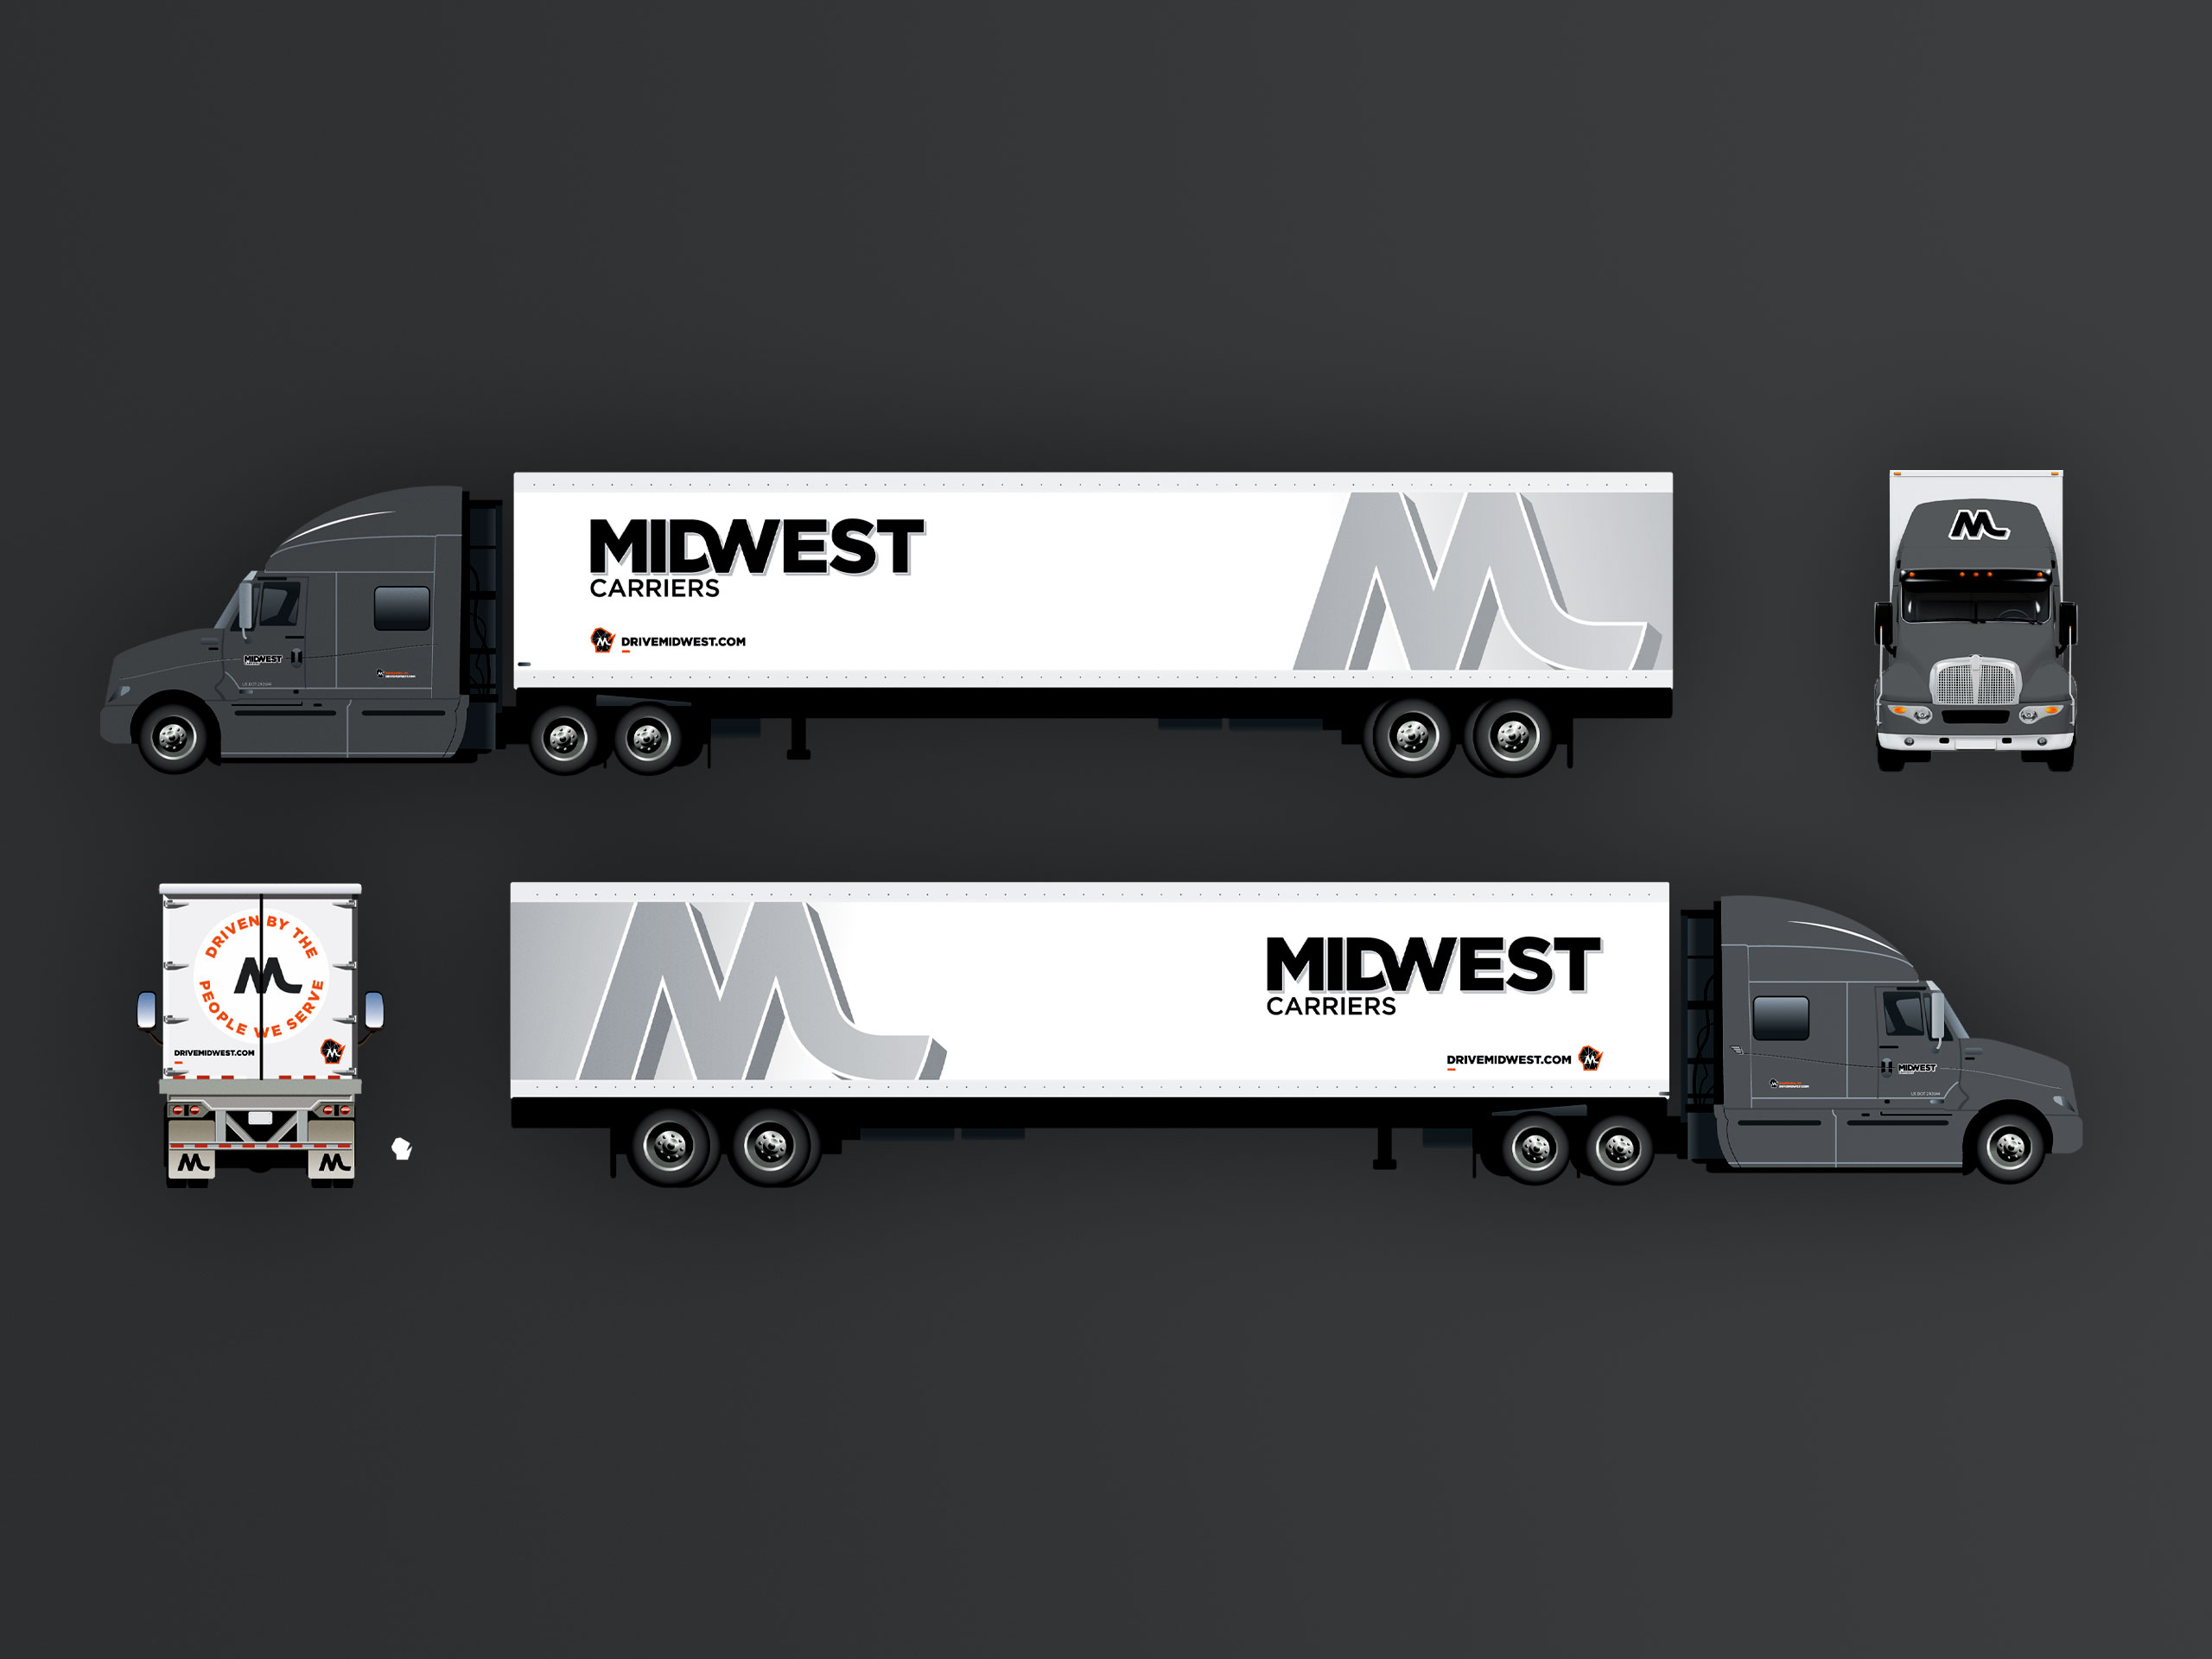  - Midwest Carriers